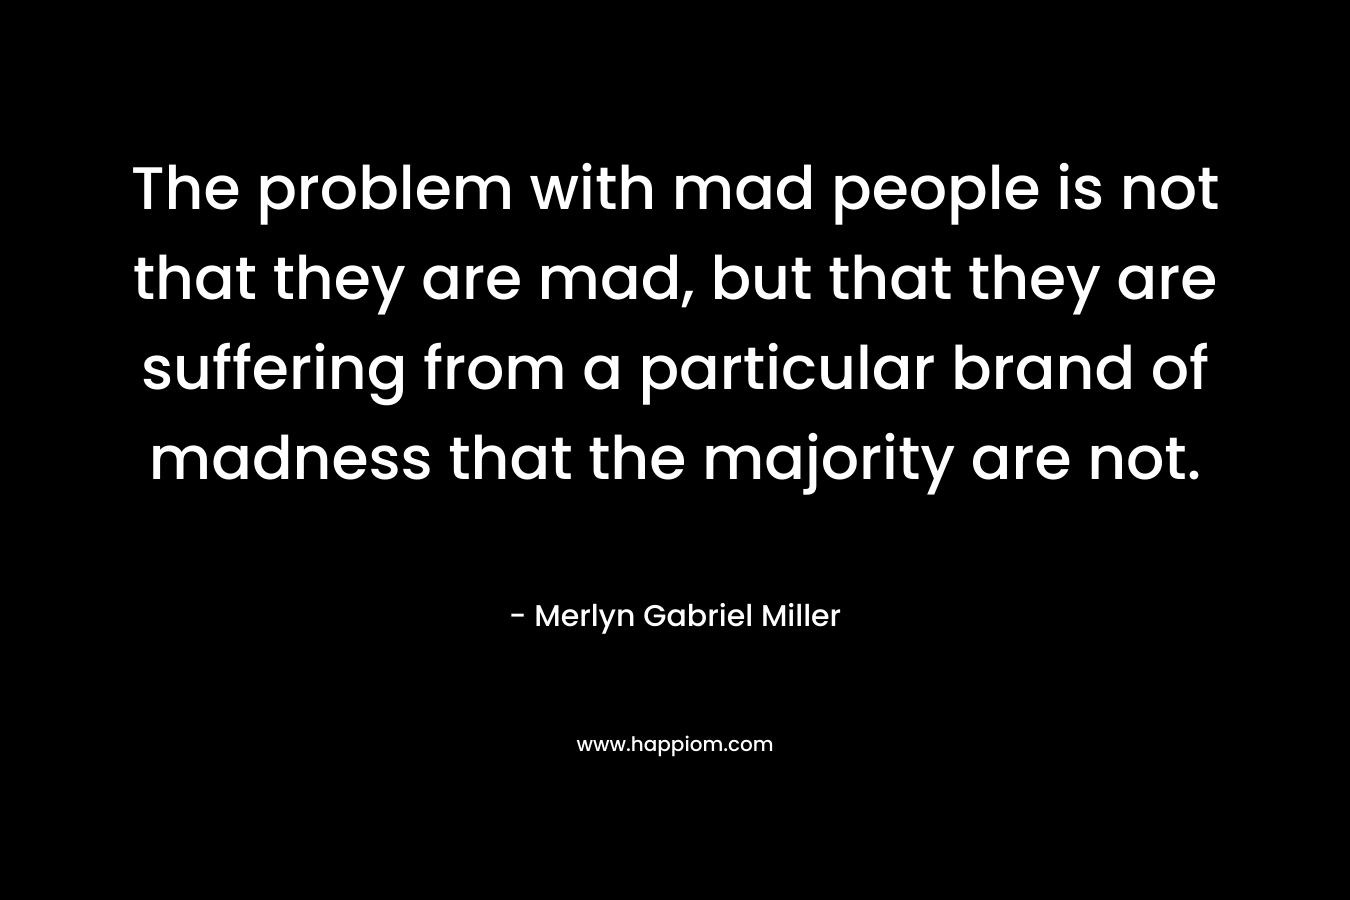 The problem with mad people is not that they are mad, but that they are suffering from a particular brand of madness that the majority are not. – Merlyn Gabriel Miller